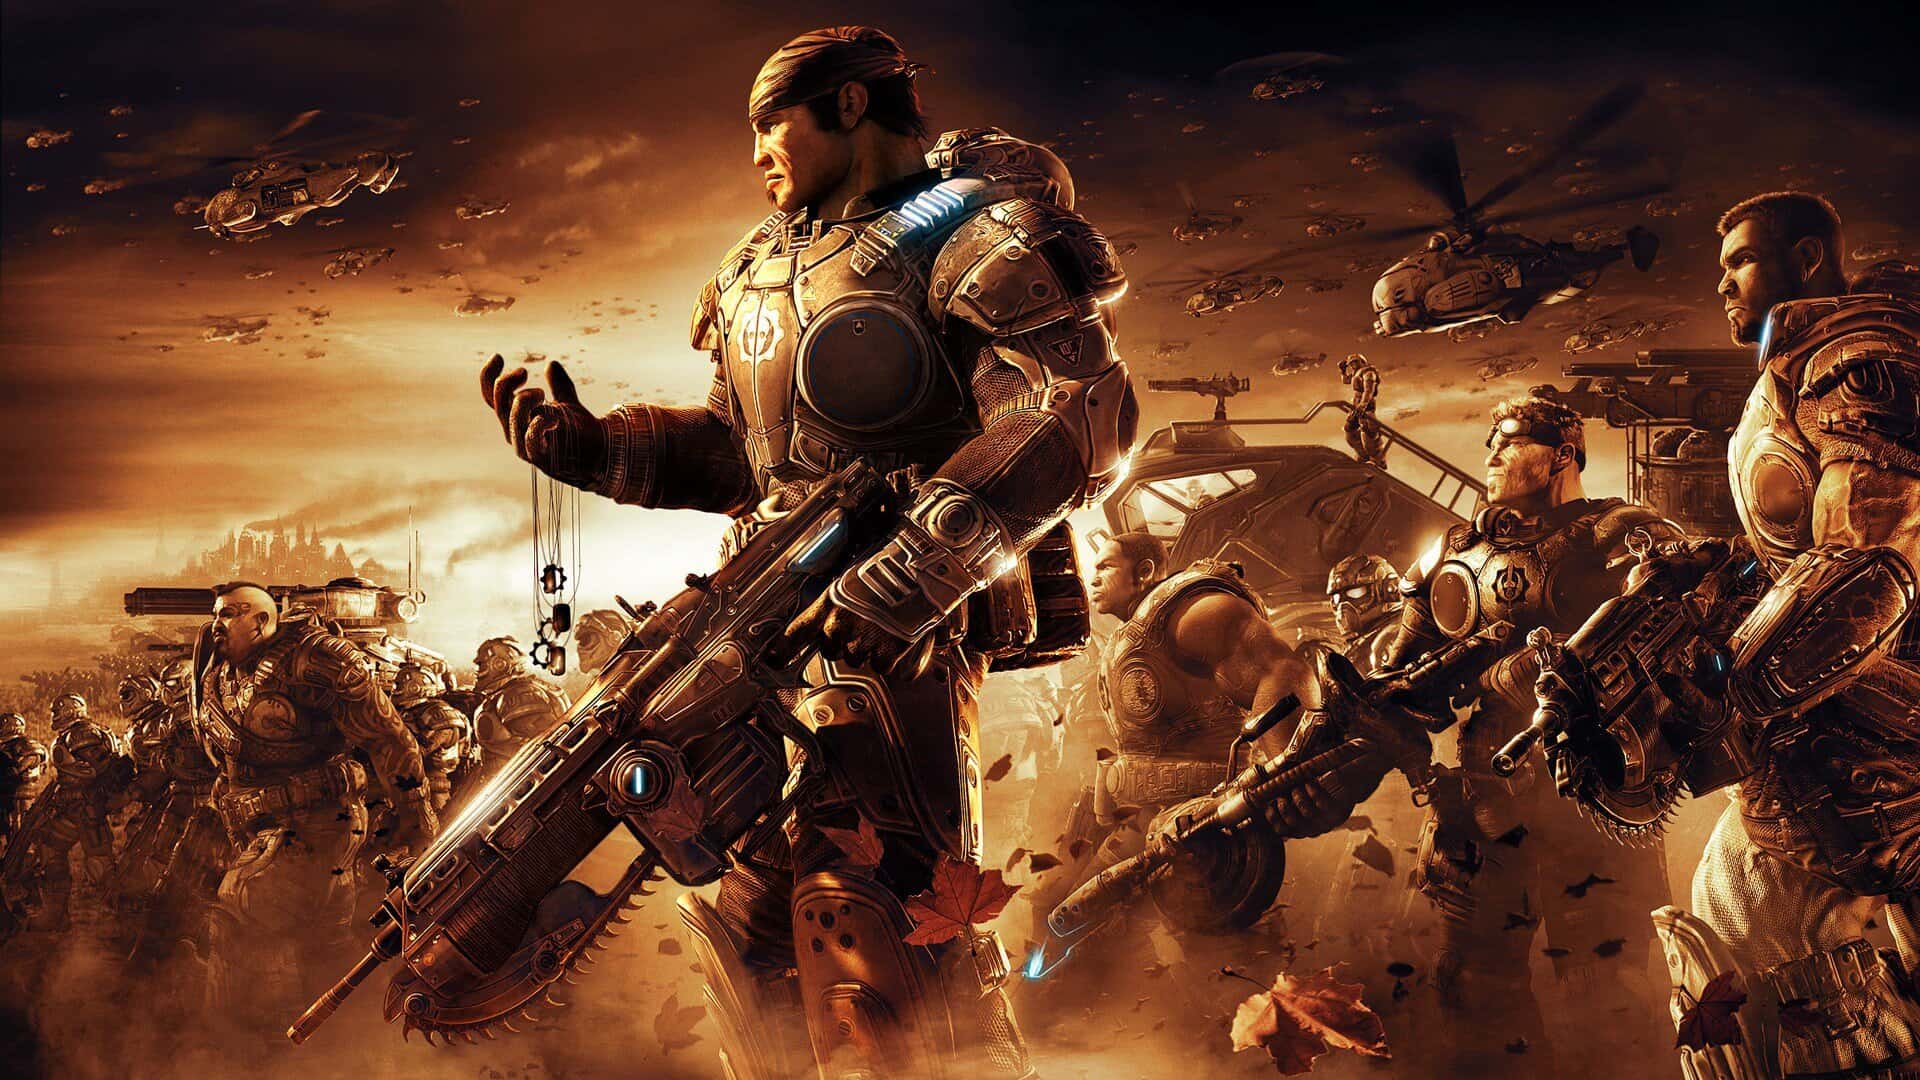 danny lietz recommends pictures of gears of war pic